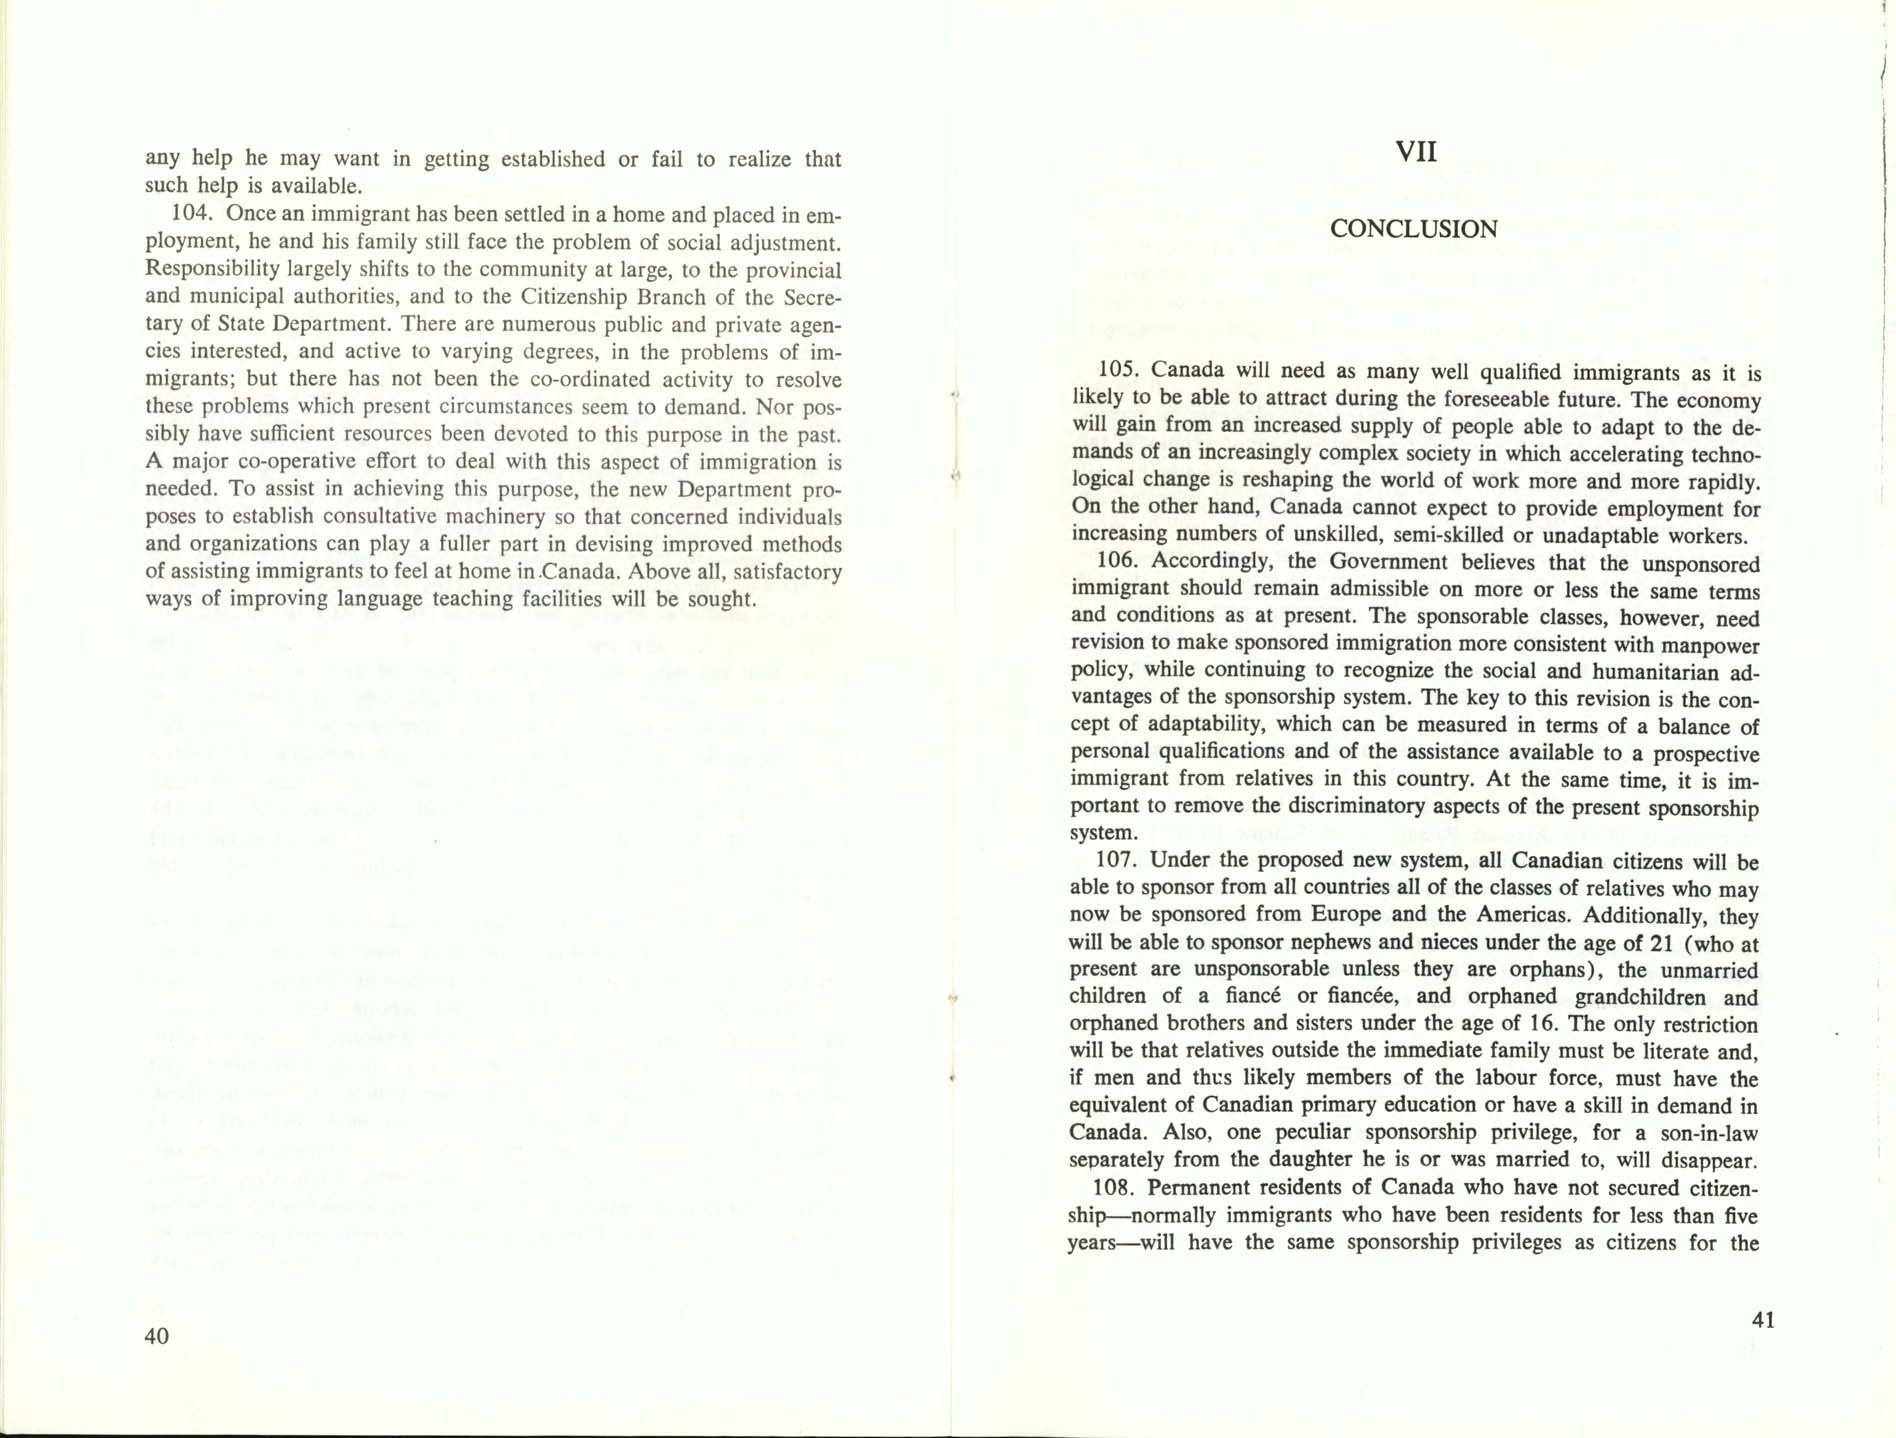 Page 40, 41 White Paper on Immigration, 1966